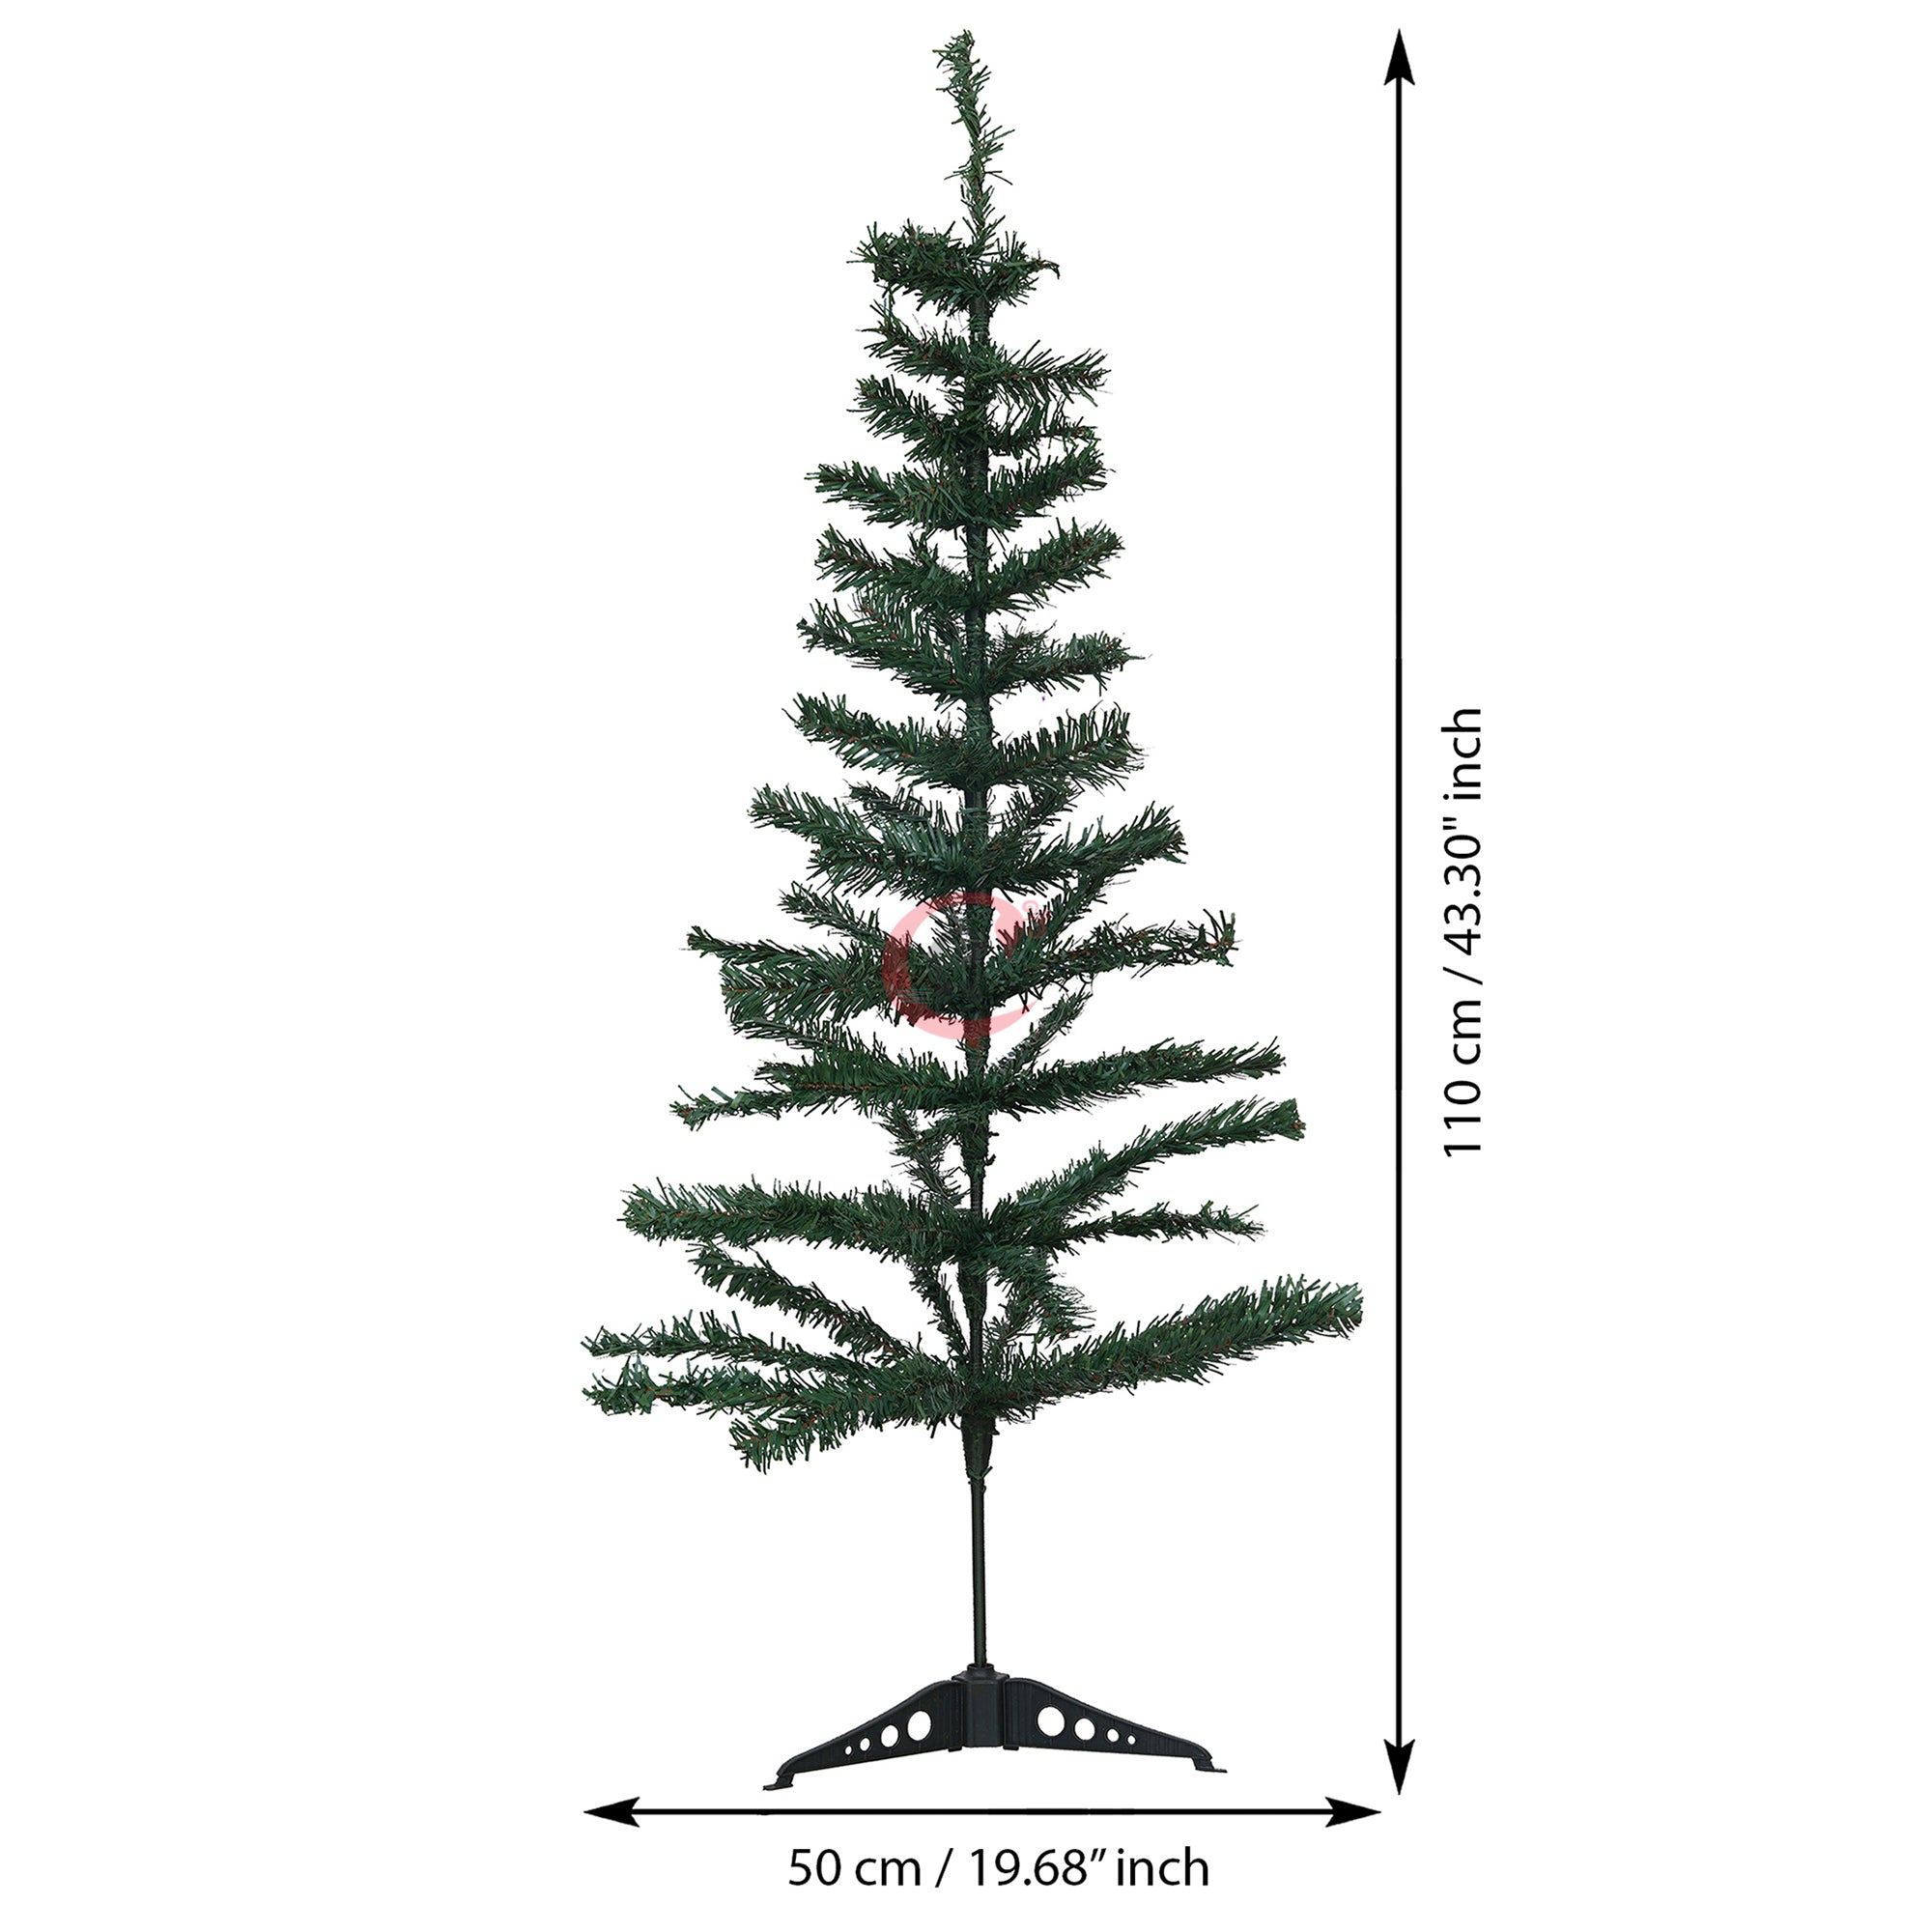 eCraftIndia 4 Feet Green Artificial Christmas Tree Xmas Pine Tree with Metal Stand - Xmas Tree for Indoor, Outdoor, Home, Living Room, Office, Church Decor - Merry Christmas Decoration Item… 3